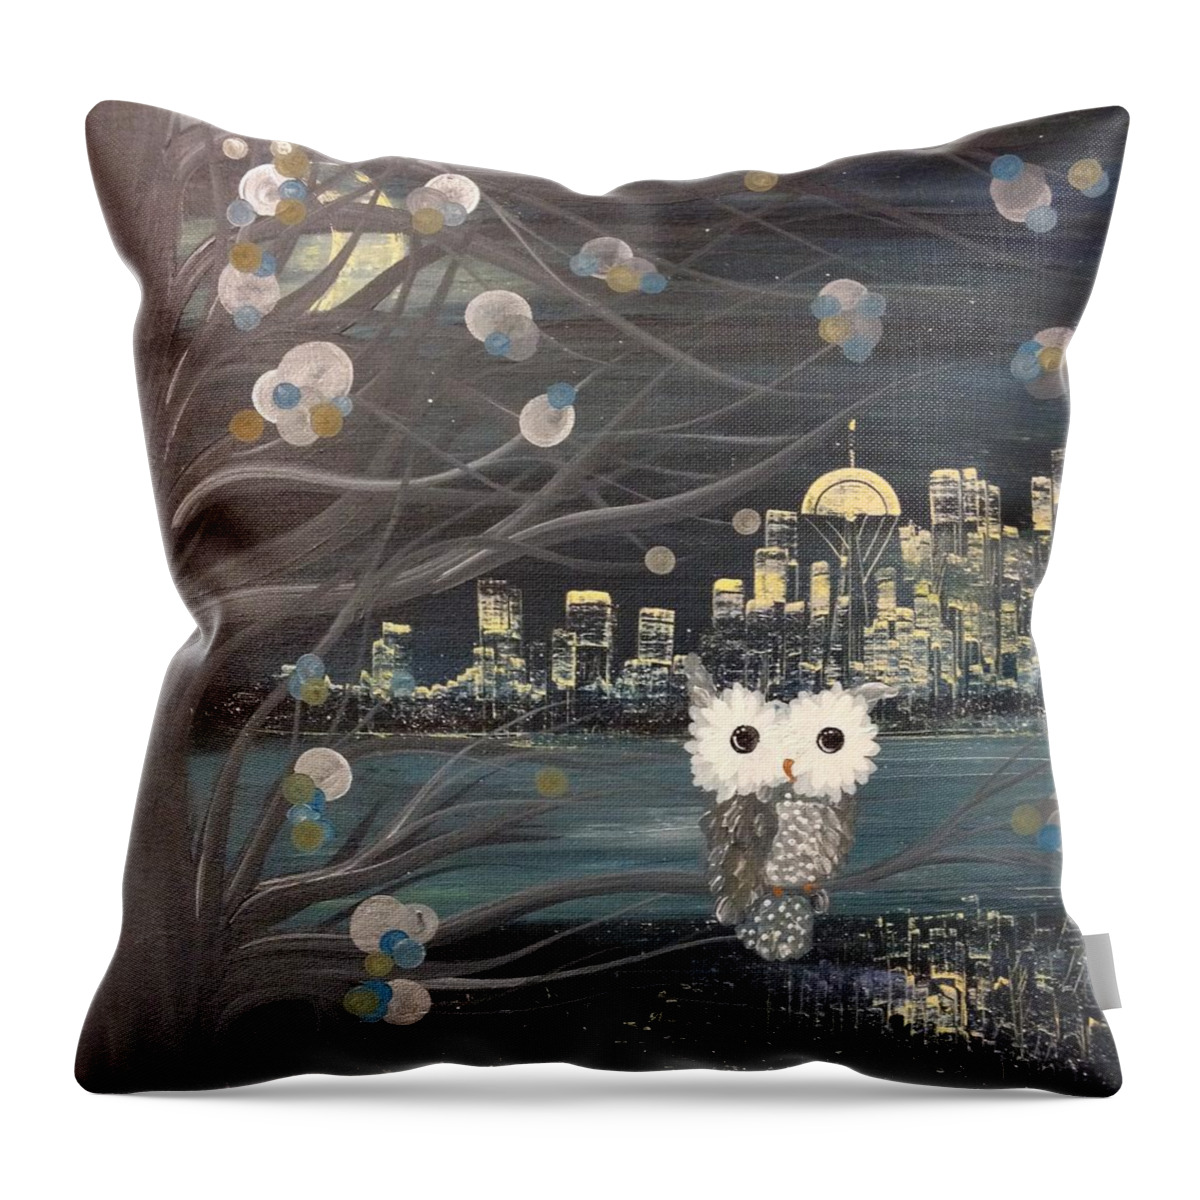 Contemporary Mixed Media Original Art By Amanda Mimi Stirn Throw Pillow featuring the painting Hoolandia - Hoo's City 02 by MiMi Stirn